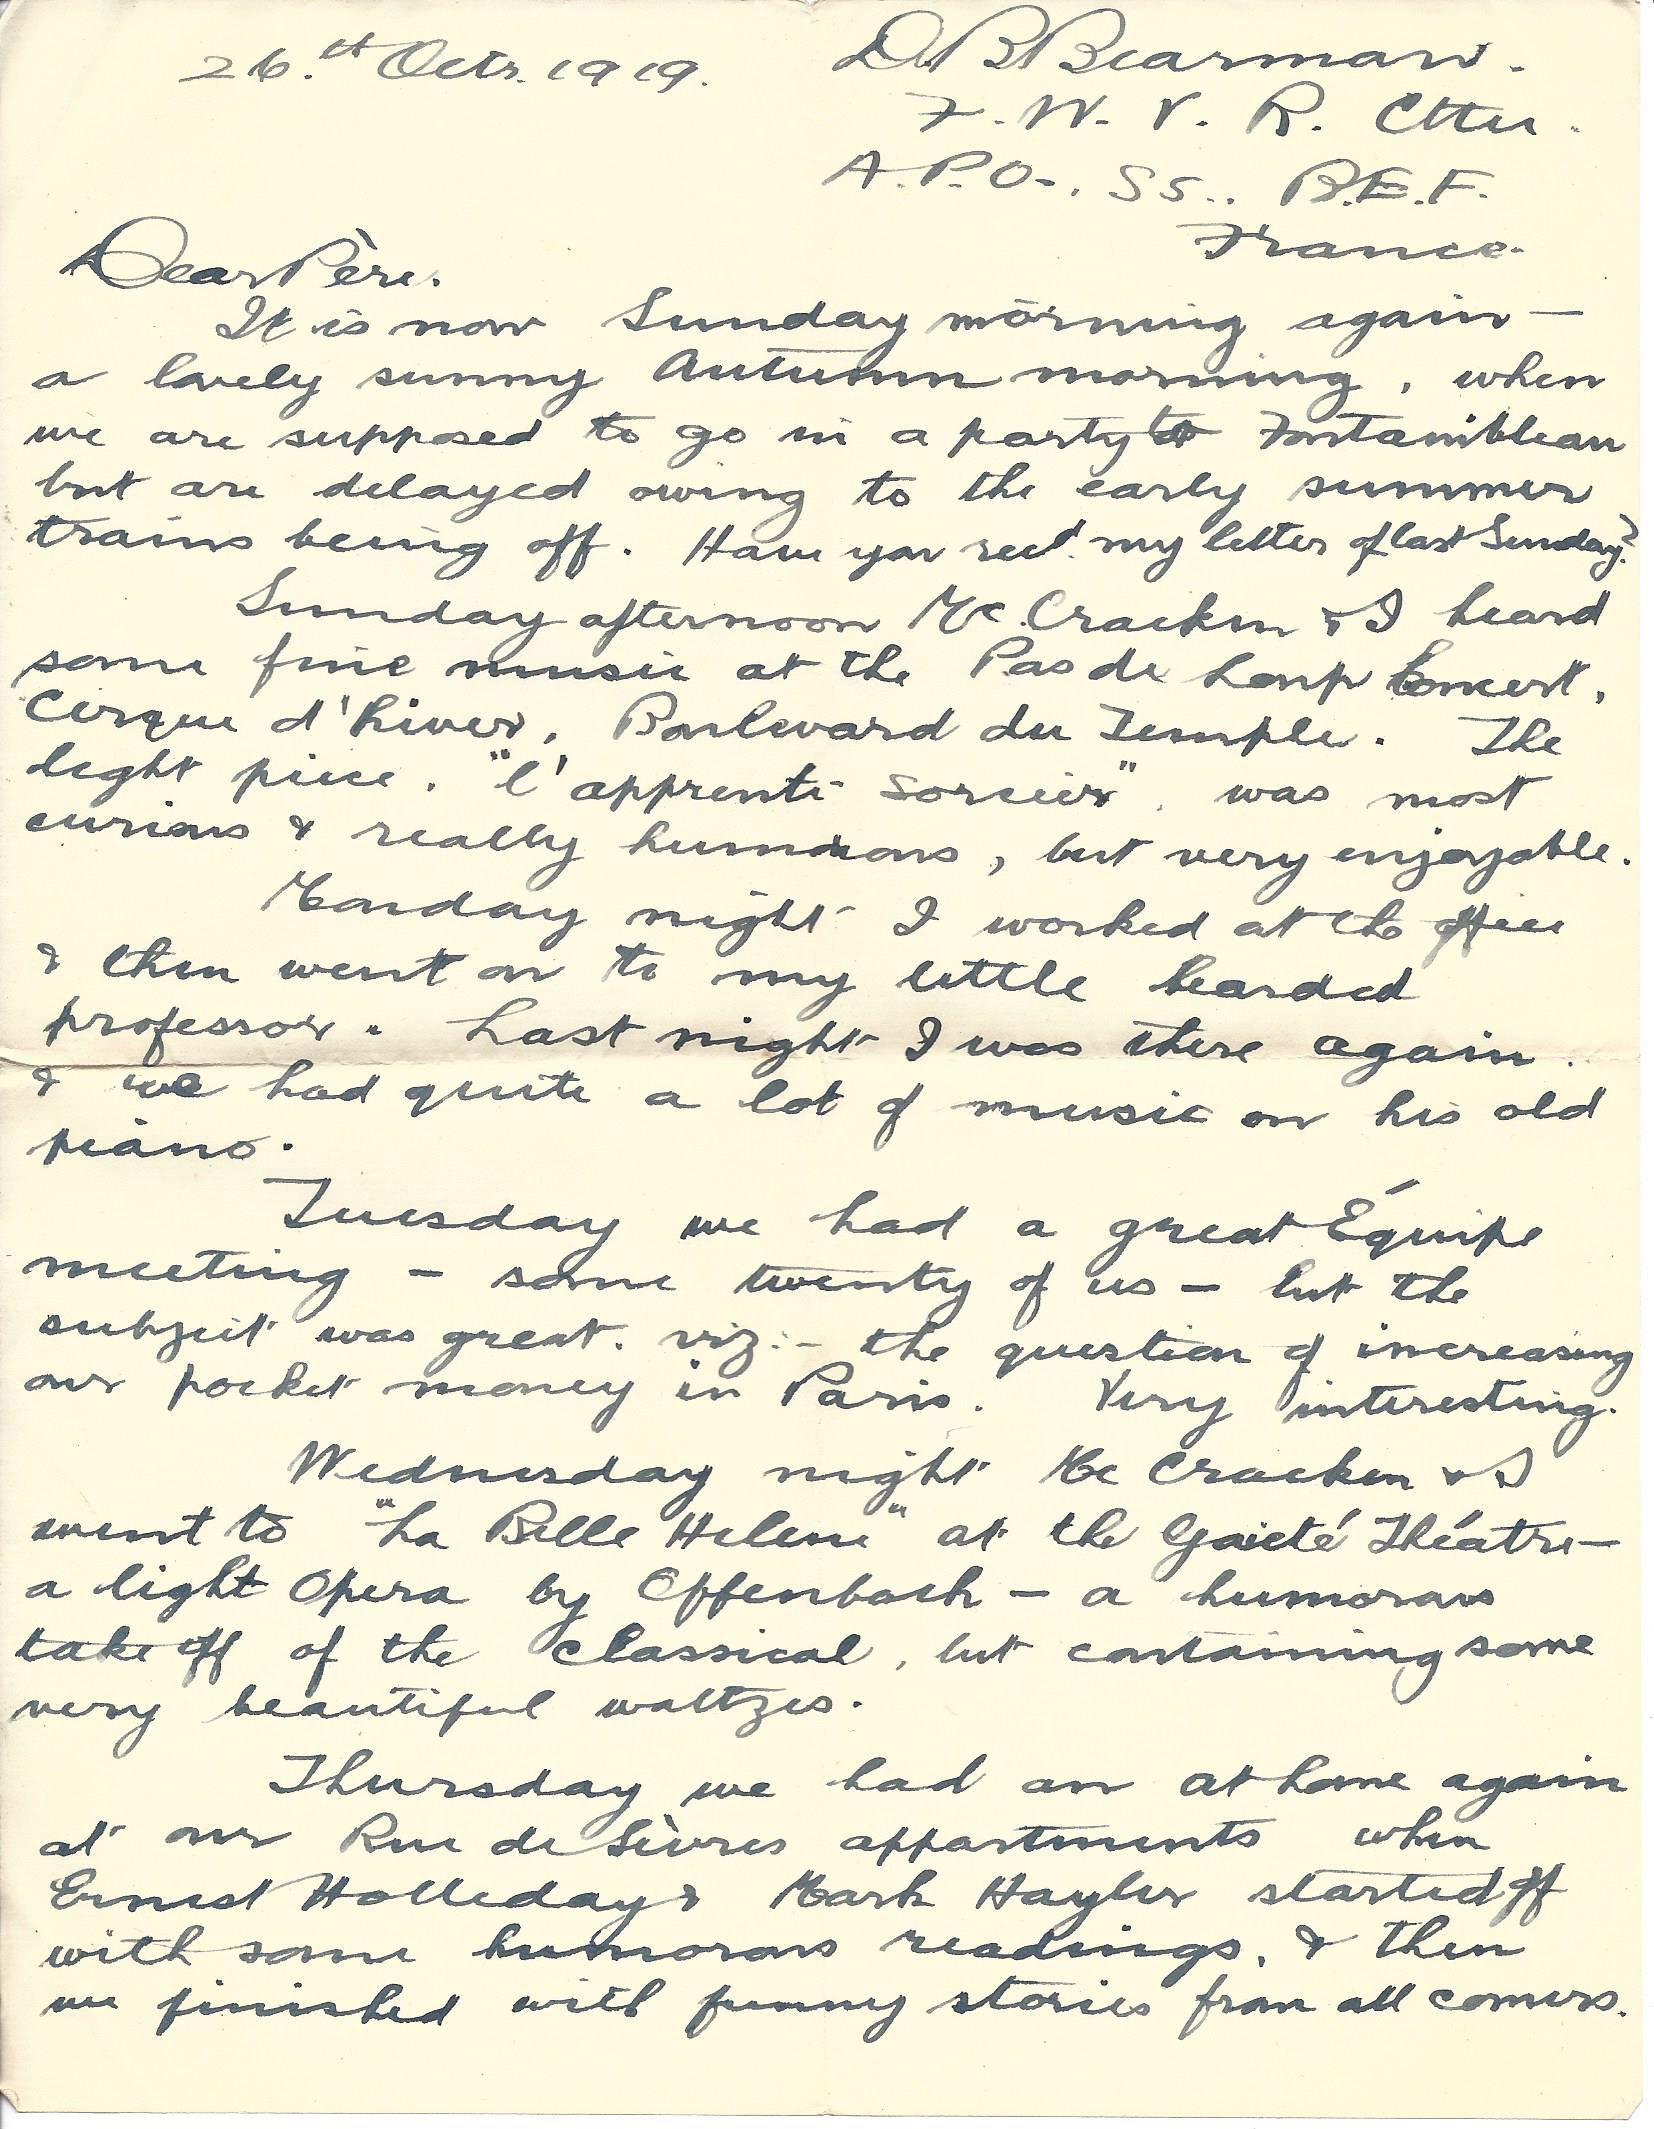 1919-10-26 Page 1 letter by Donald Bearman